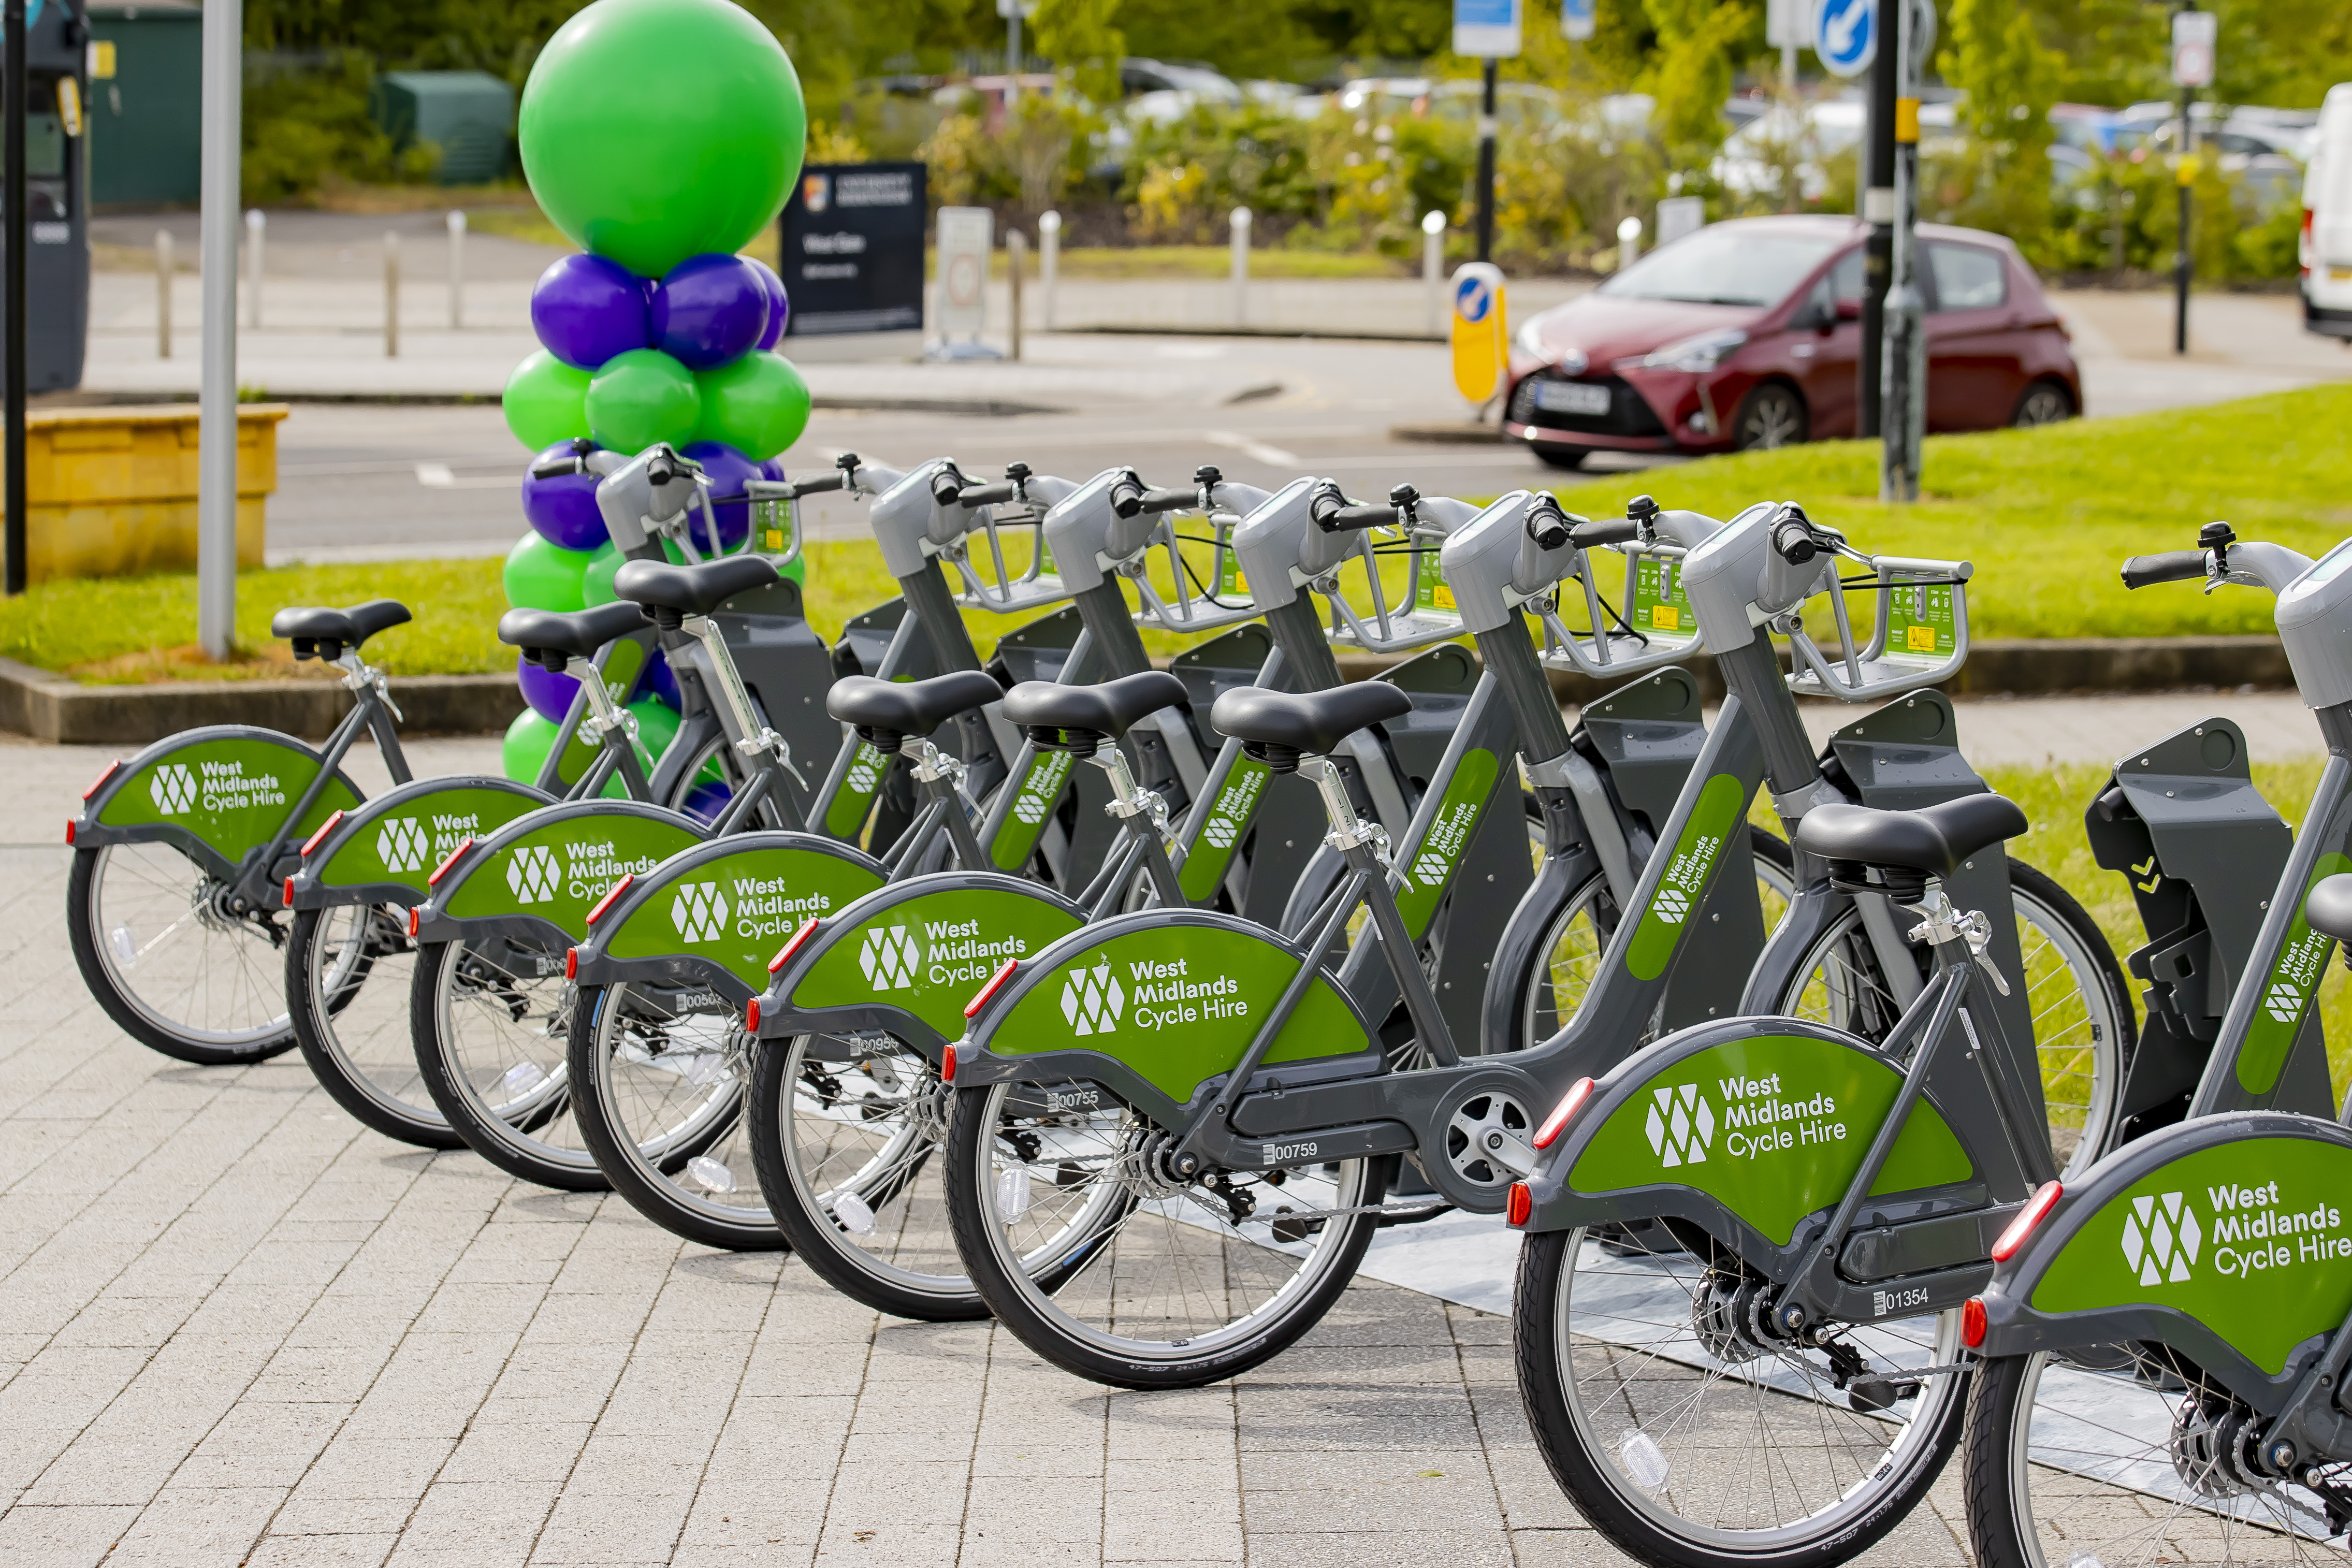 Businesses offered the chance to become the official sponsor of the region’s popular cycle hire scheme